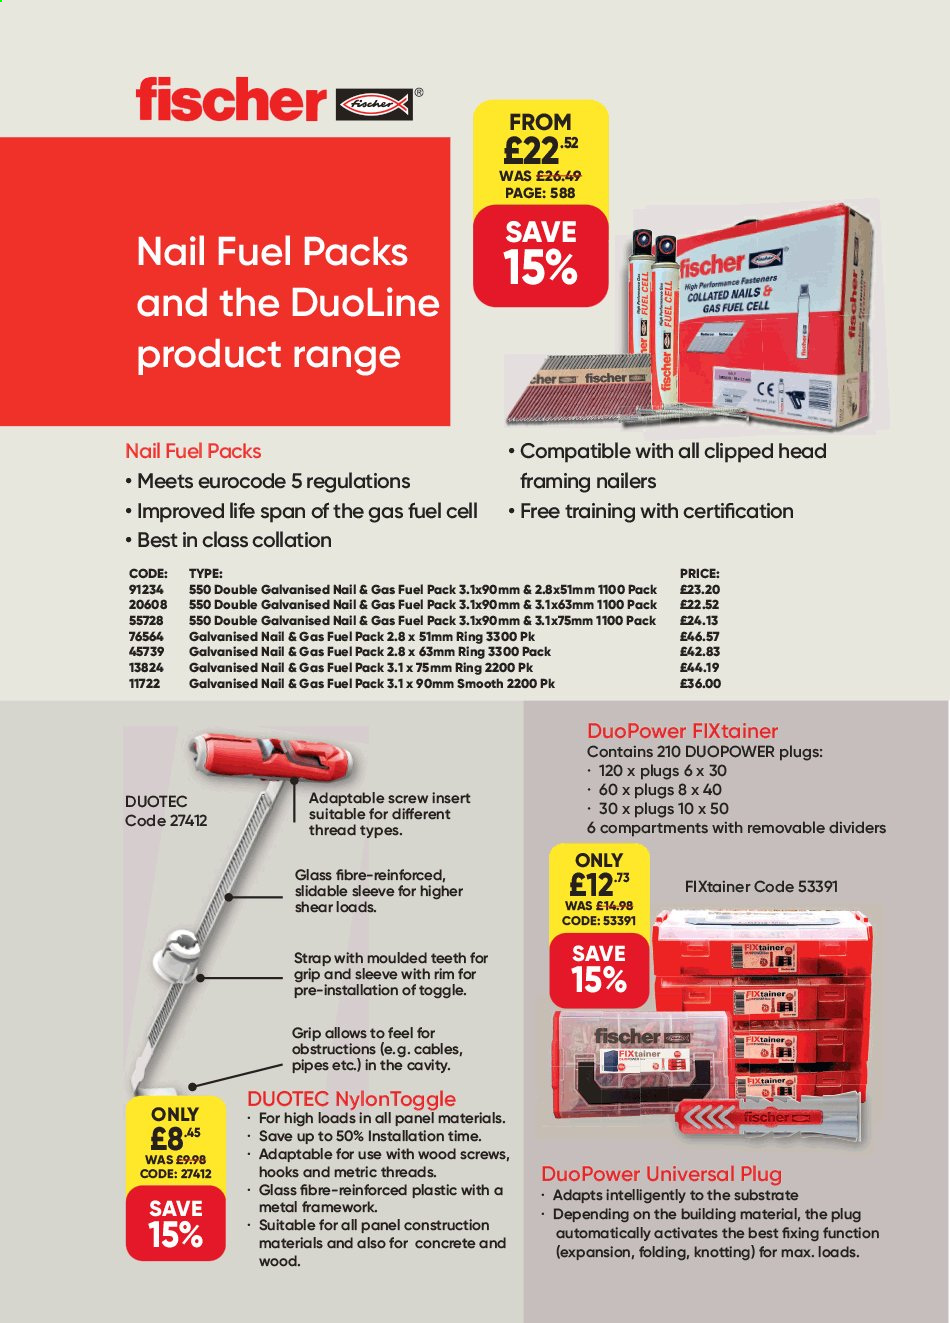 Toolstation offer . Page 583.